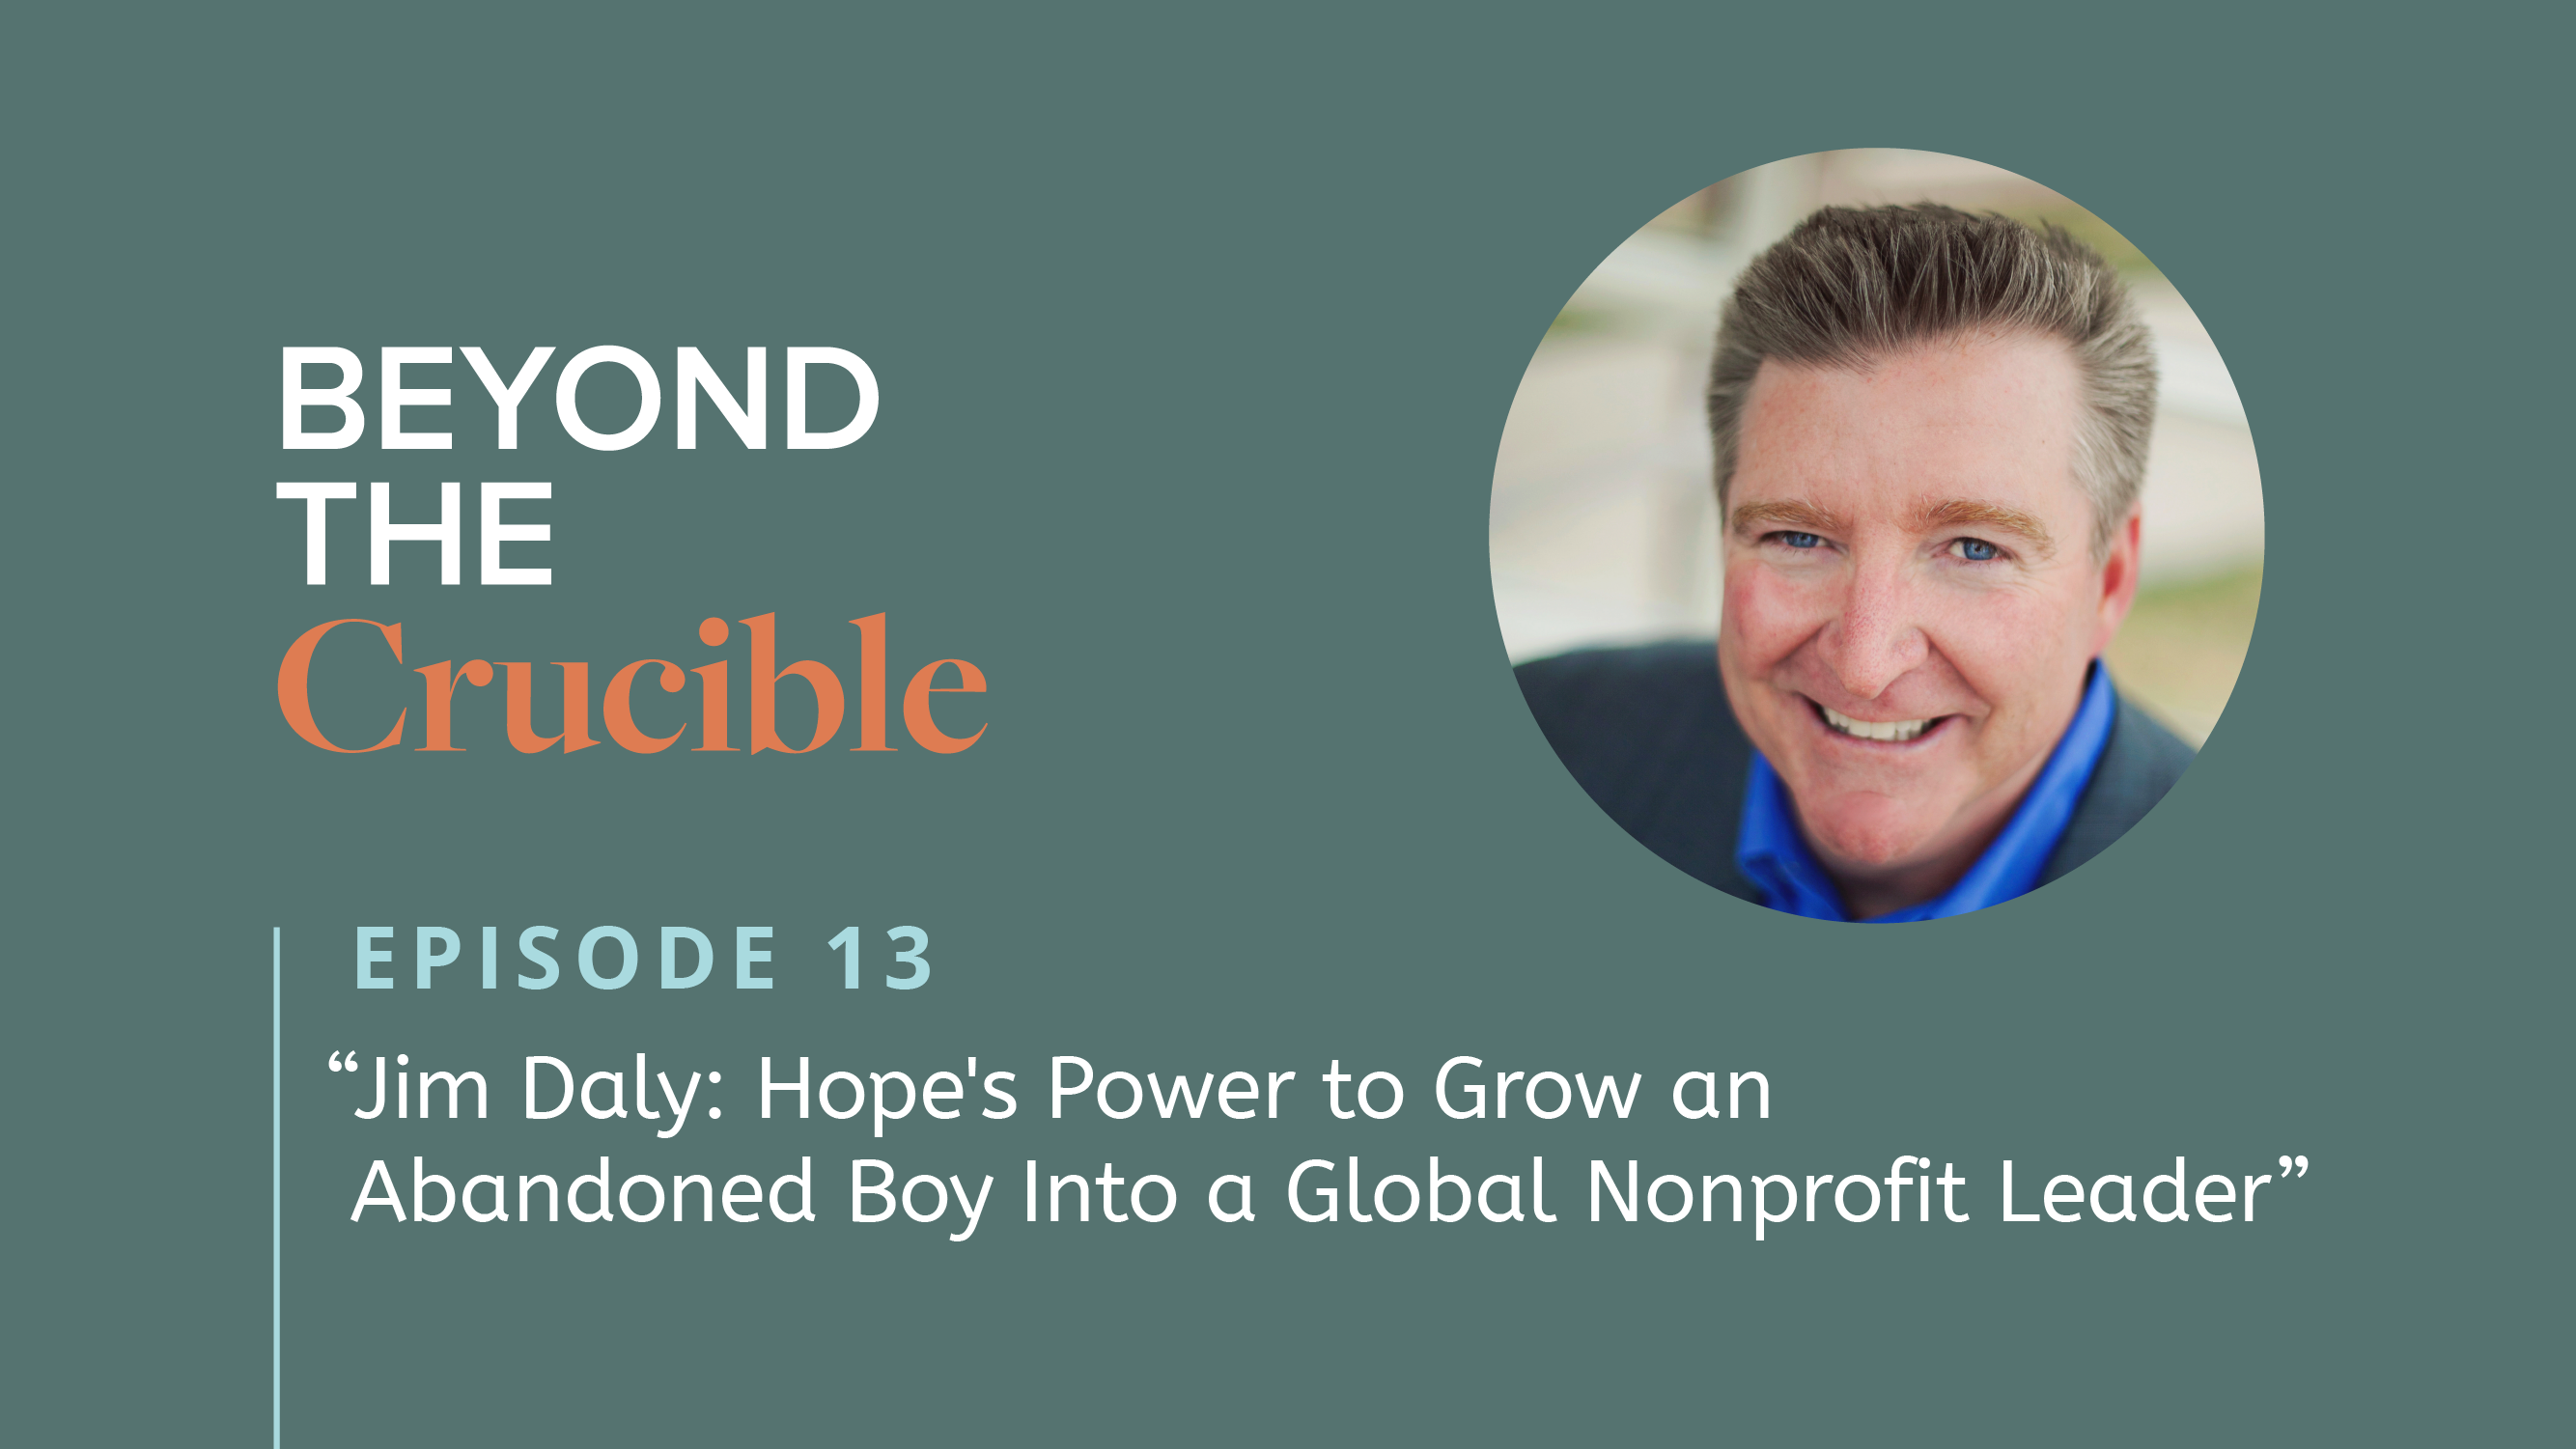 Jim Daly: Hope’s Power to Grow an Abandoned Boy Into a Global Nonprofit Leader #13